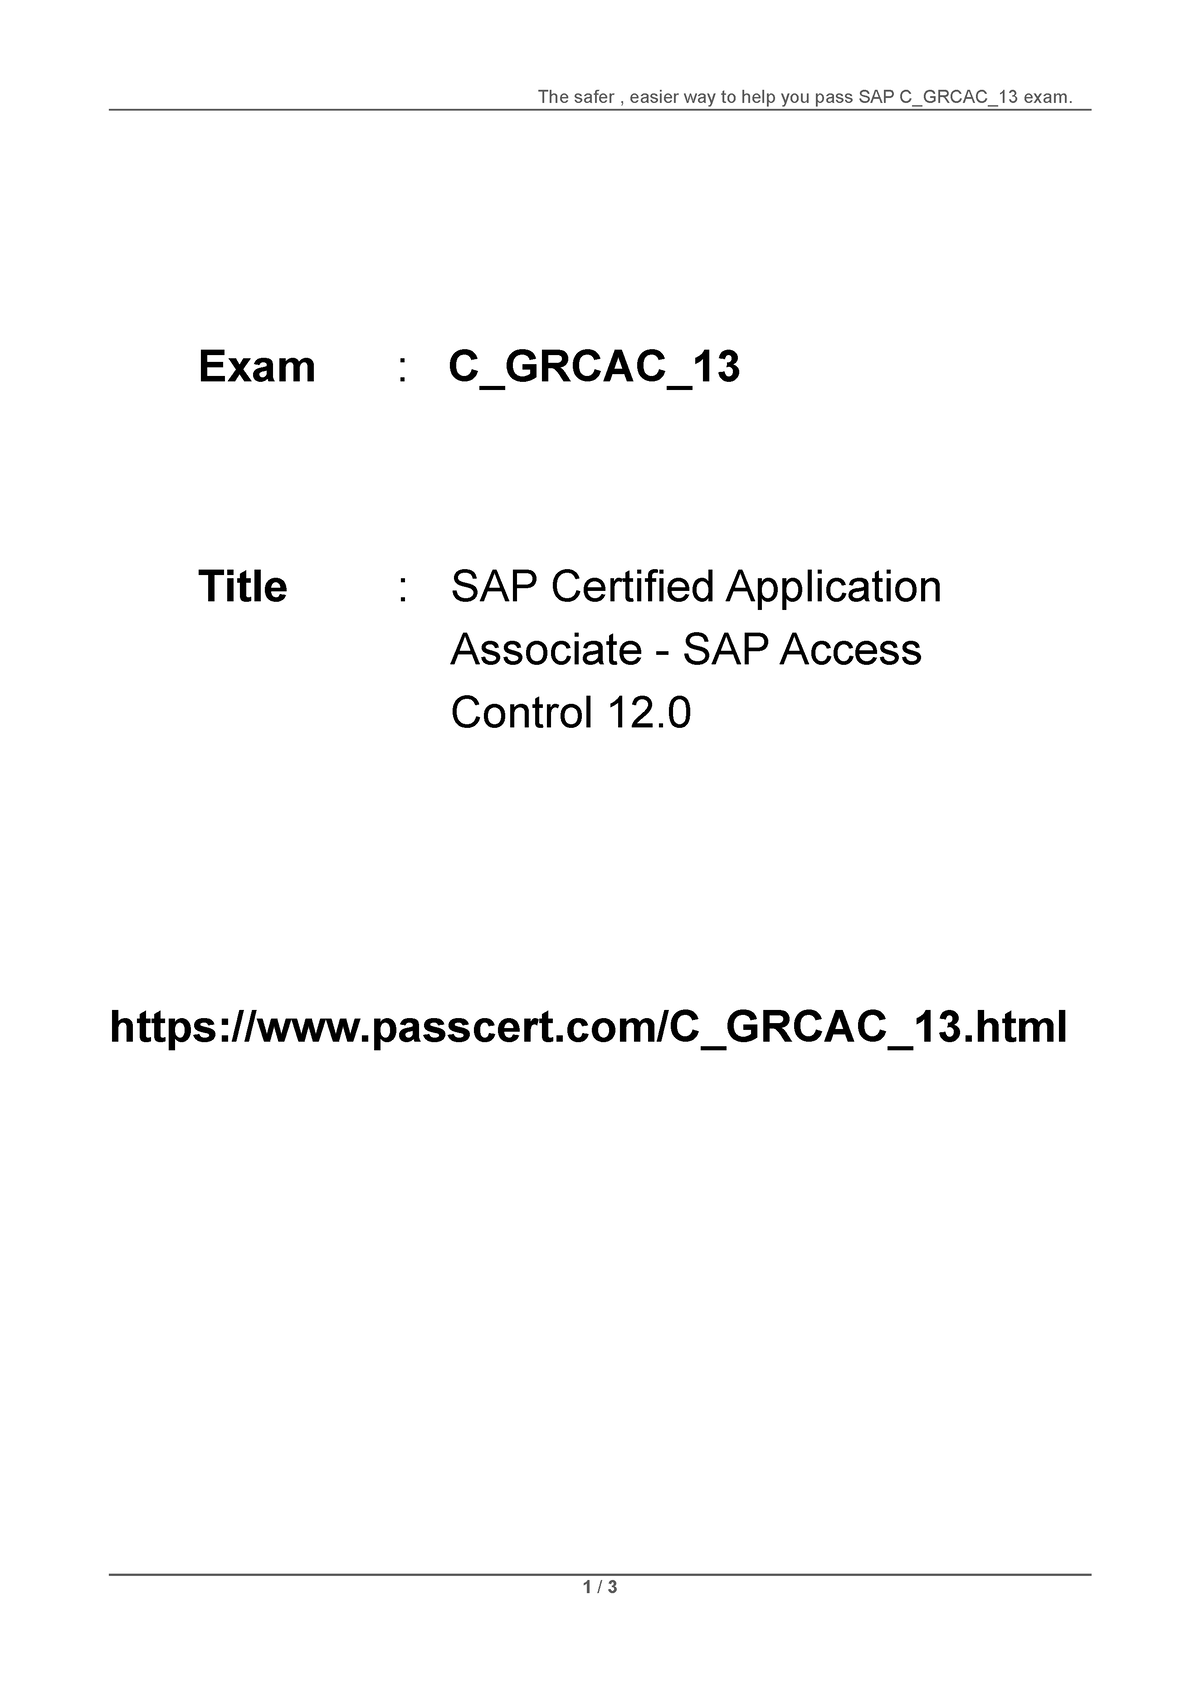 C_GRCAC_13 Reliable Exam Questions